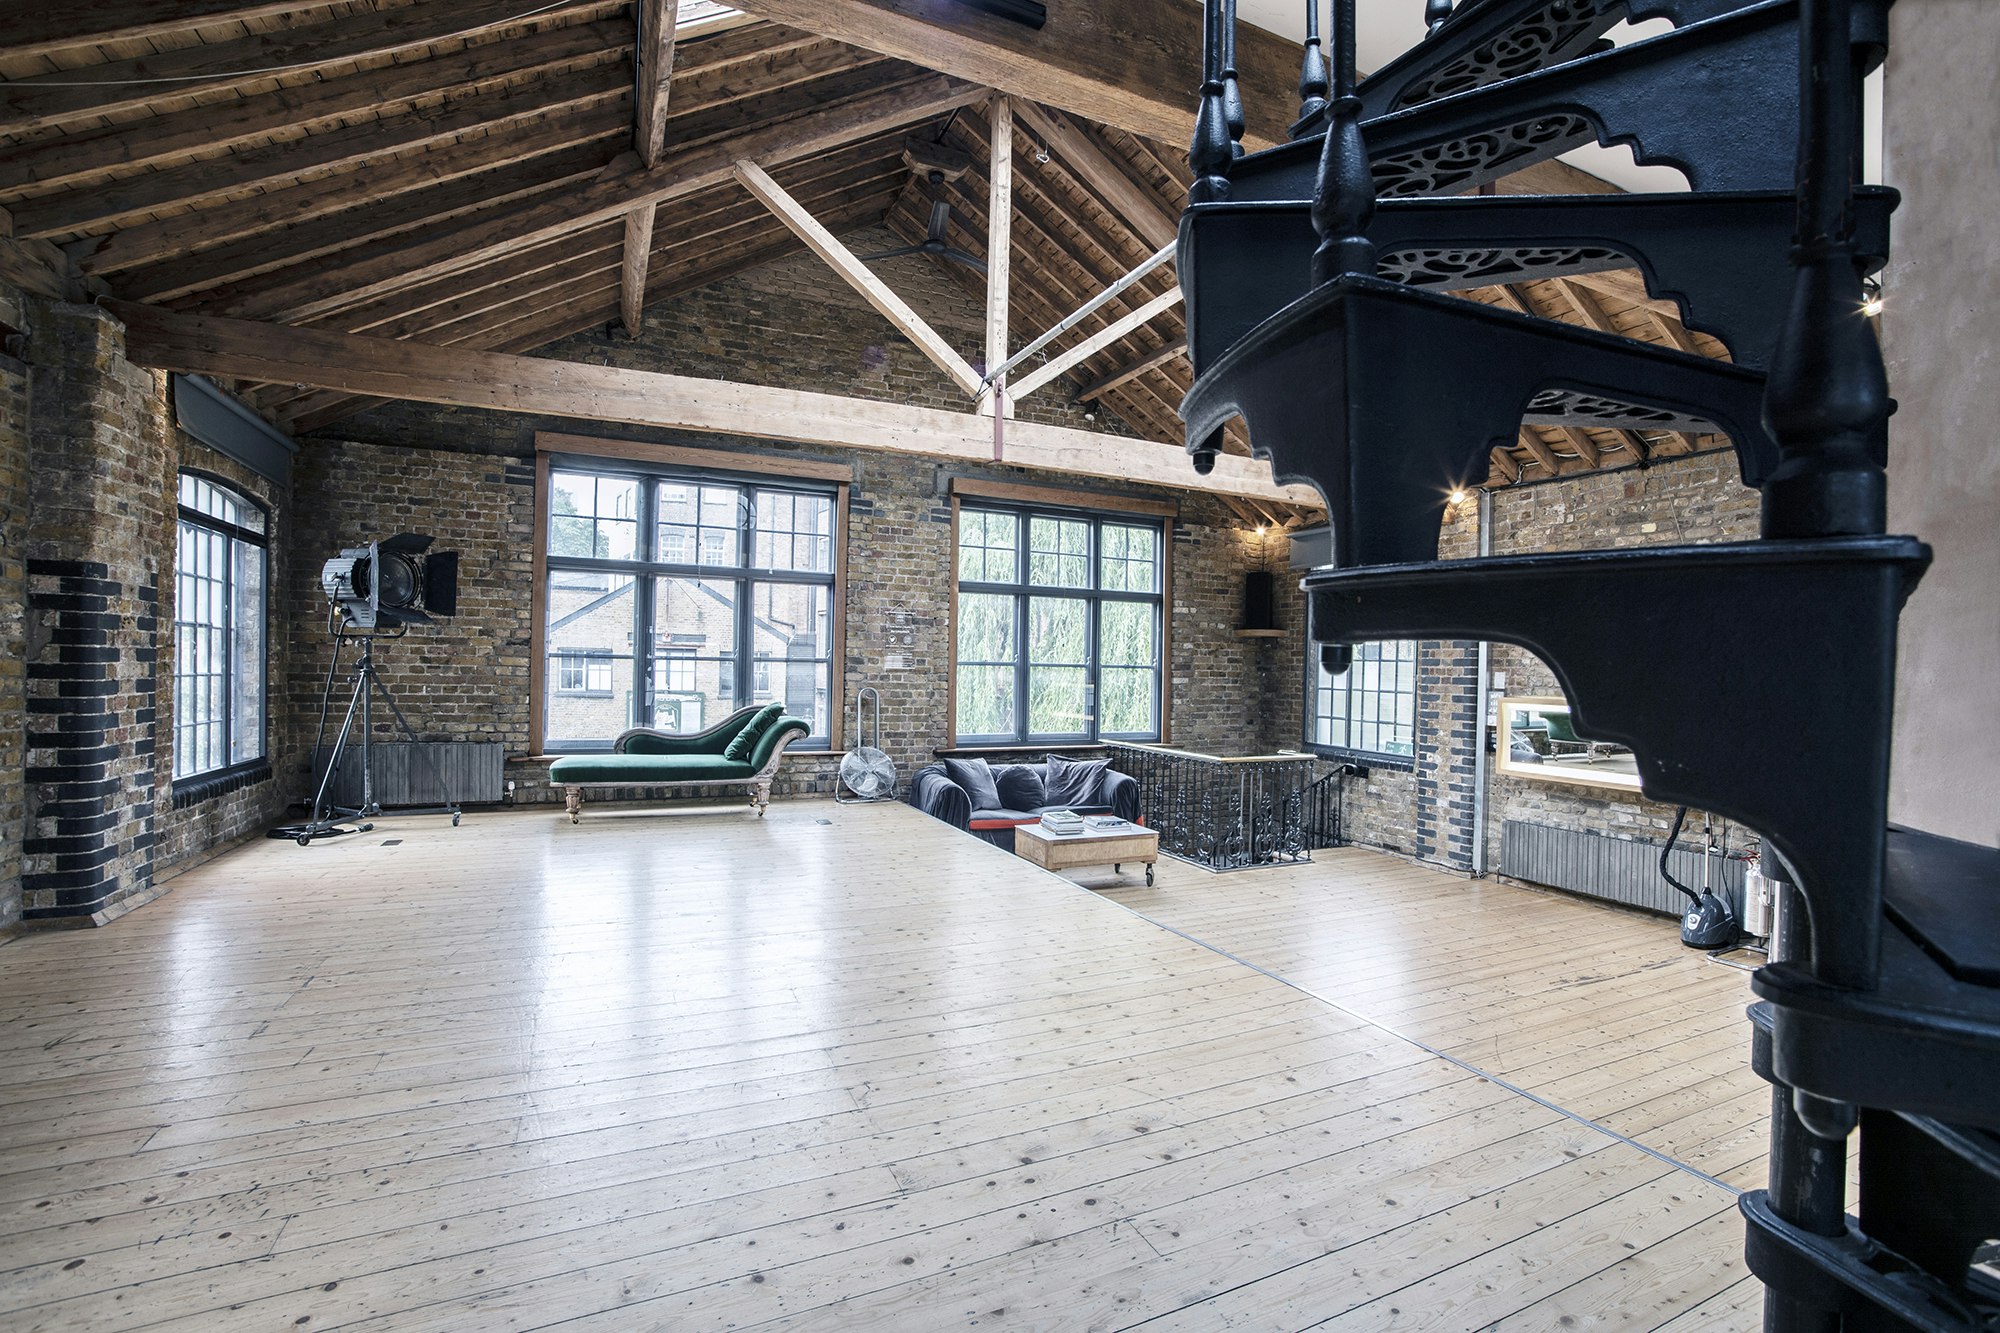 Filming Locations Venues in East London - First Option Location Studio